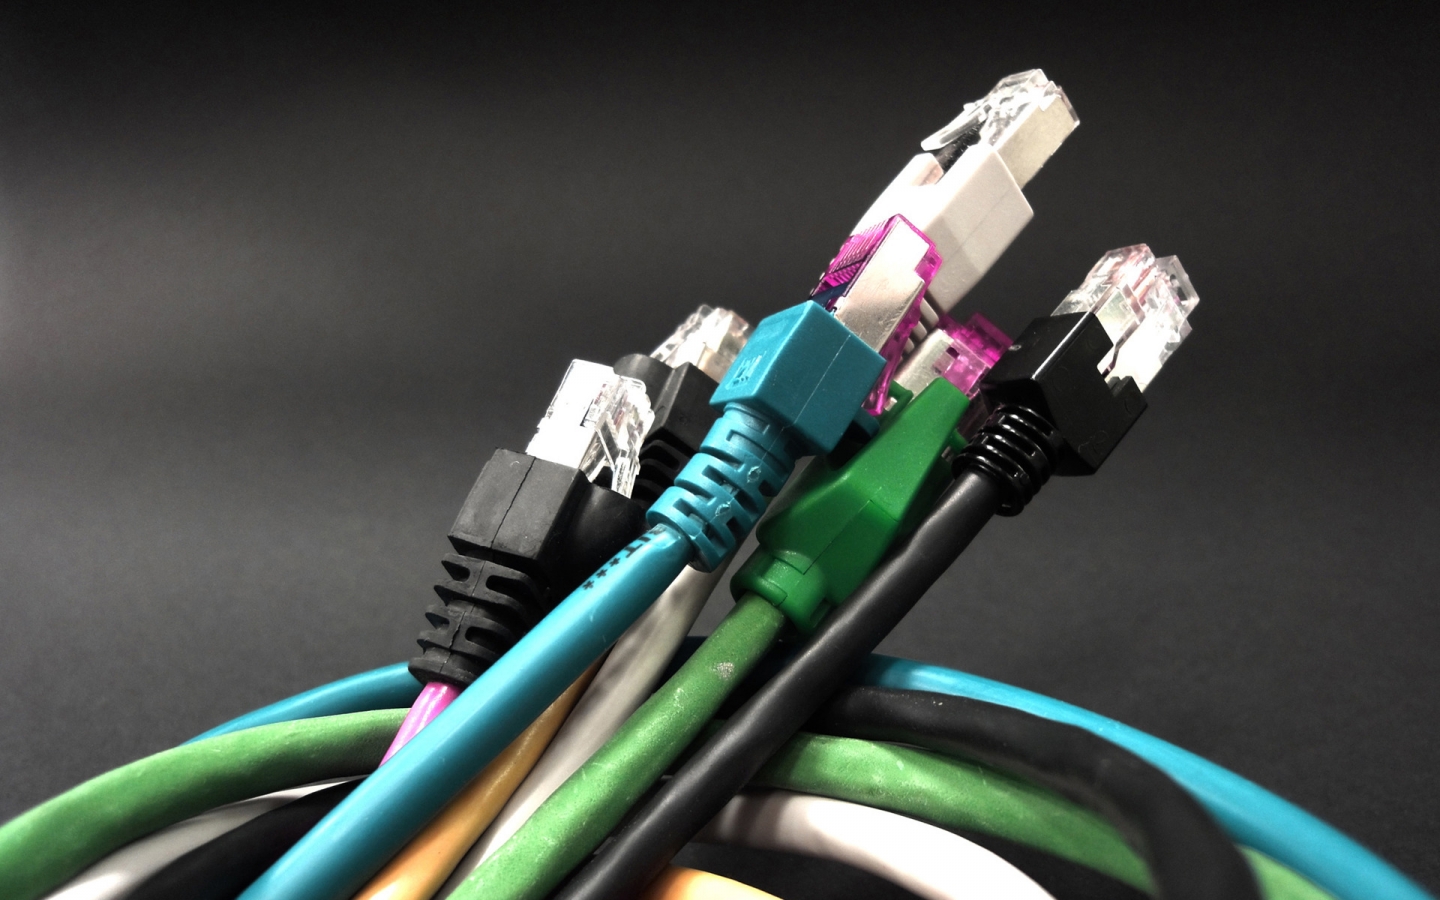 Internet Cables for 1440 x 900 widescreen resolution